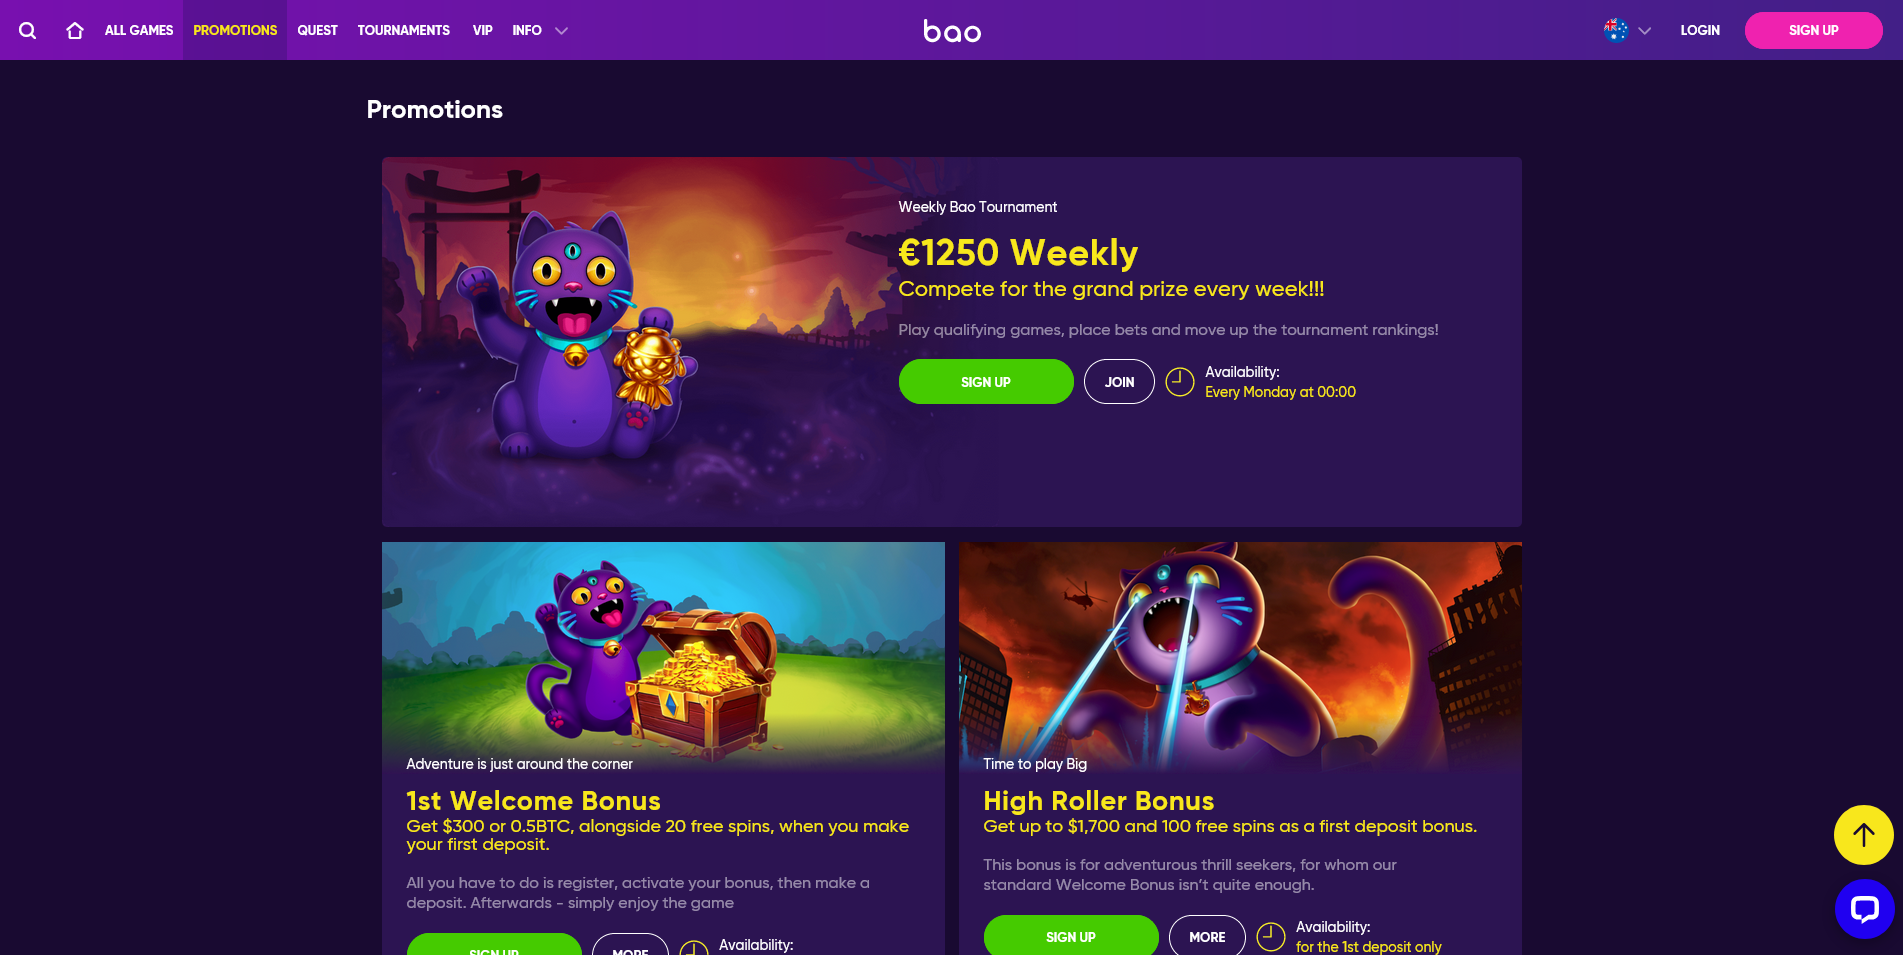 Screenshot of the Bao Casino promotions page